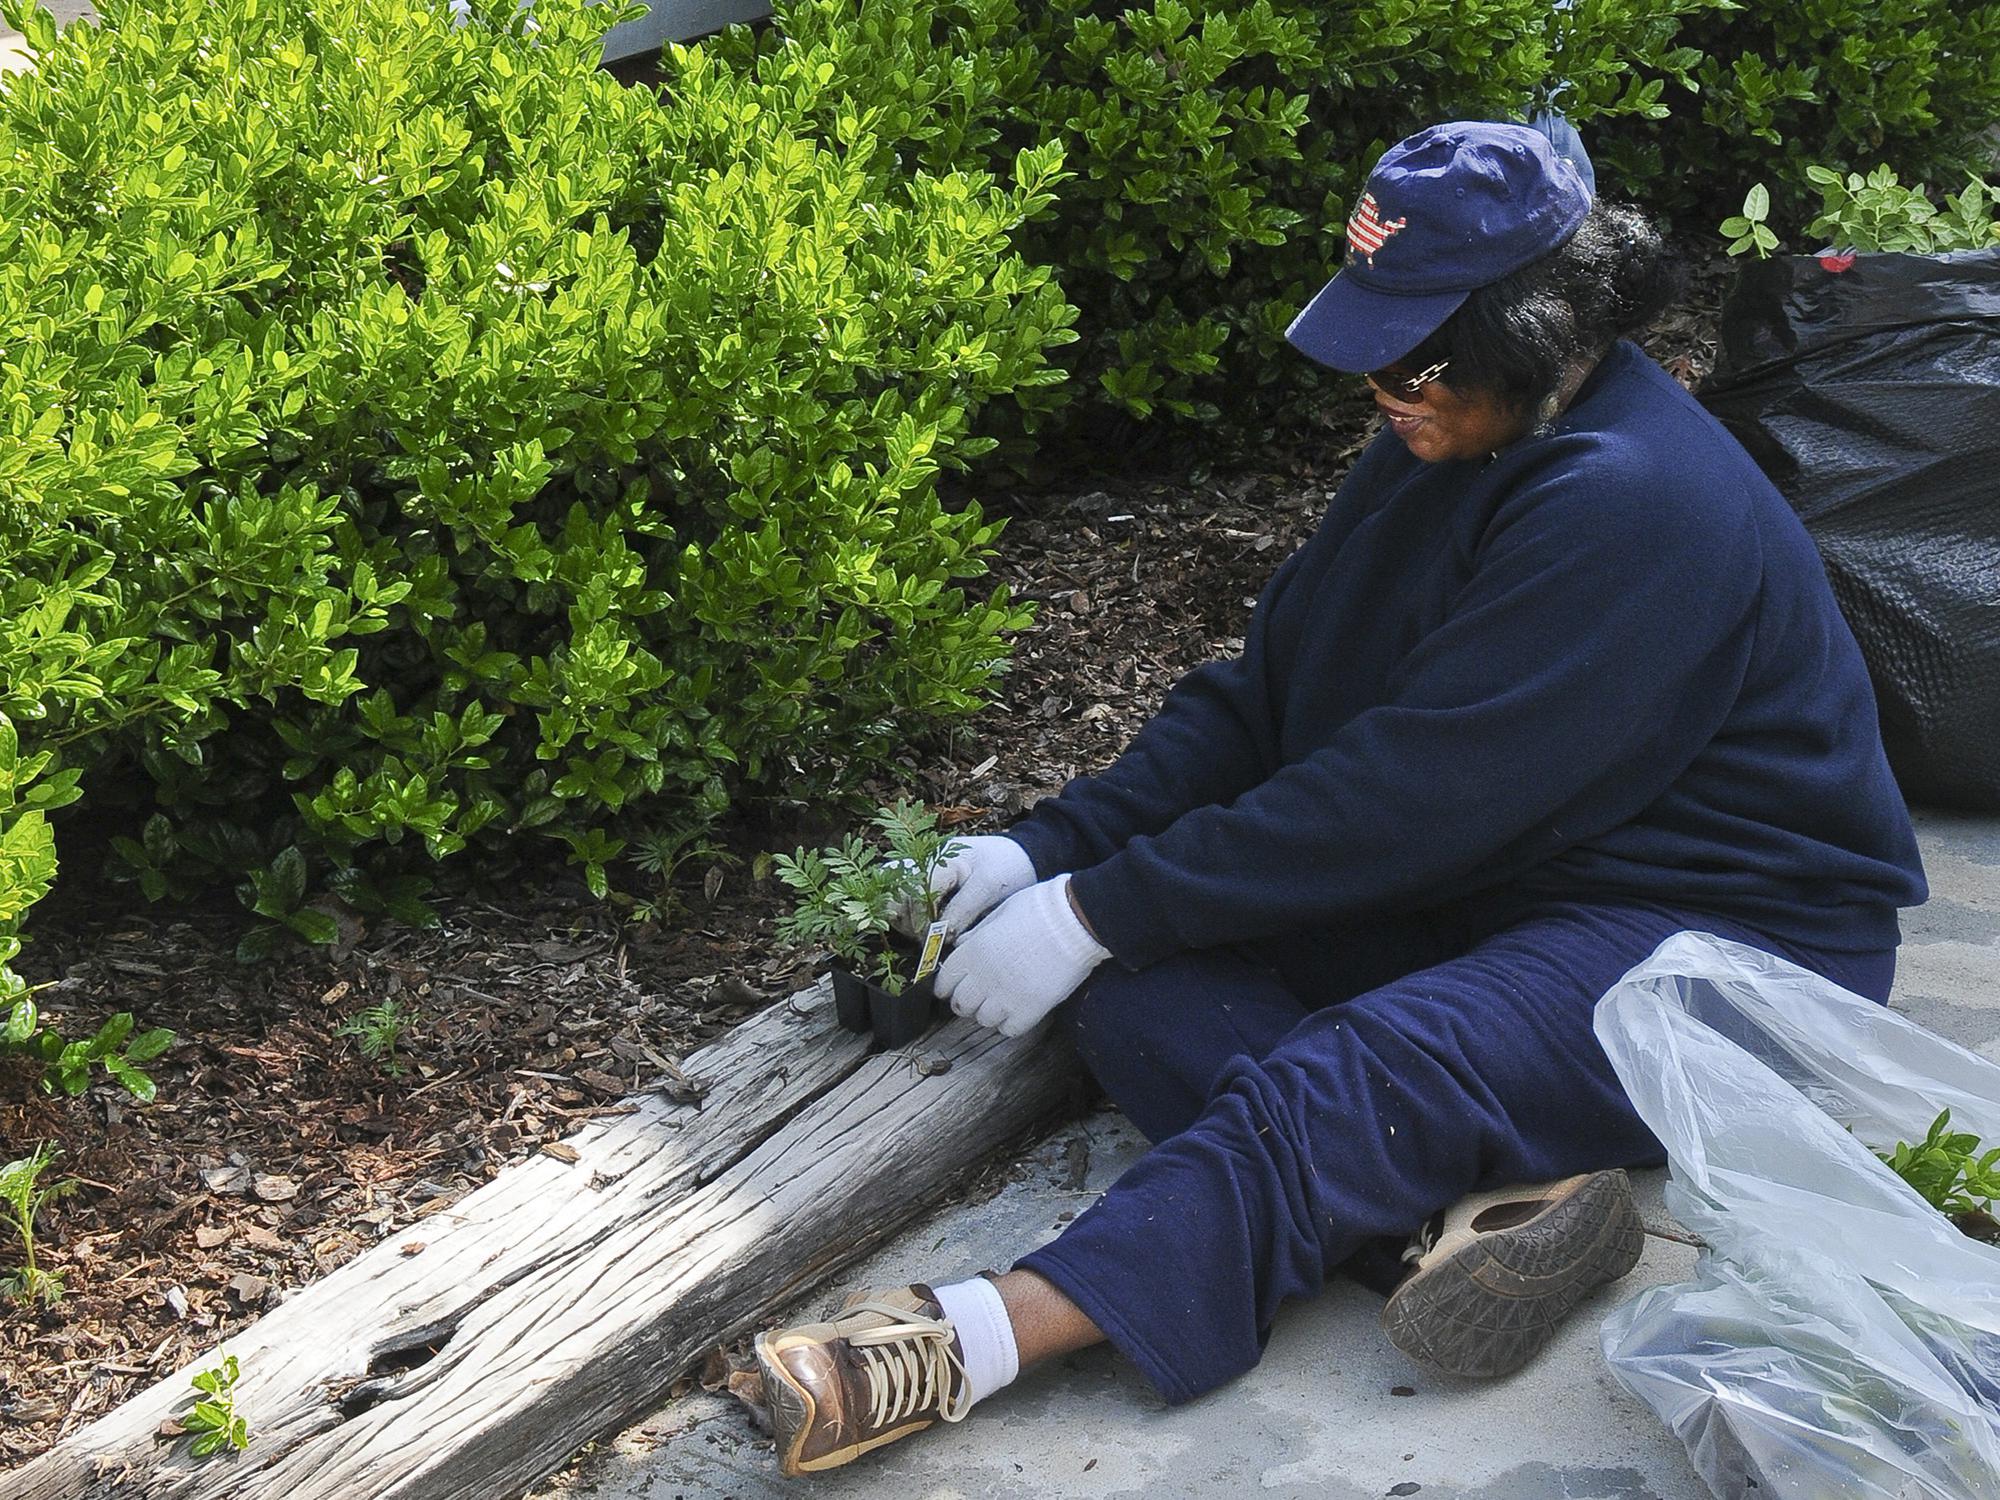 Real gardeners know the work is hard, but they consider sweat equity a reasonable price to pay to be able to enjoy their landscapes. (File Photo by MSU Extension)